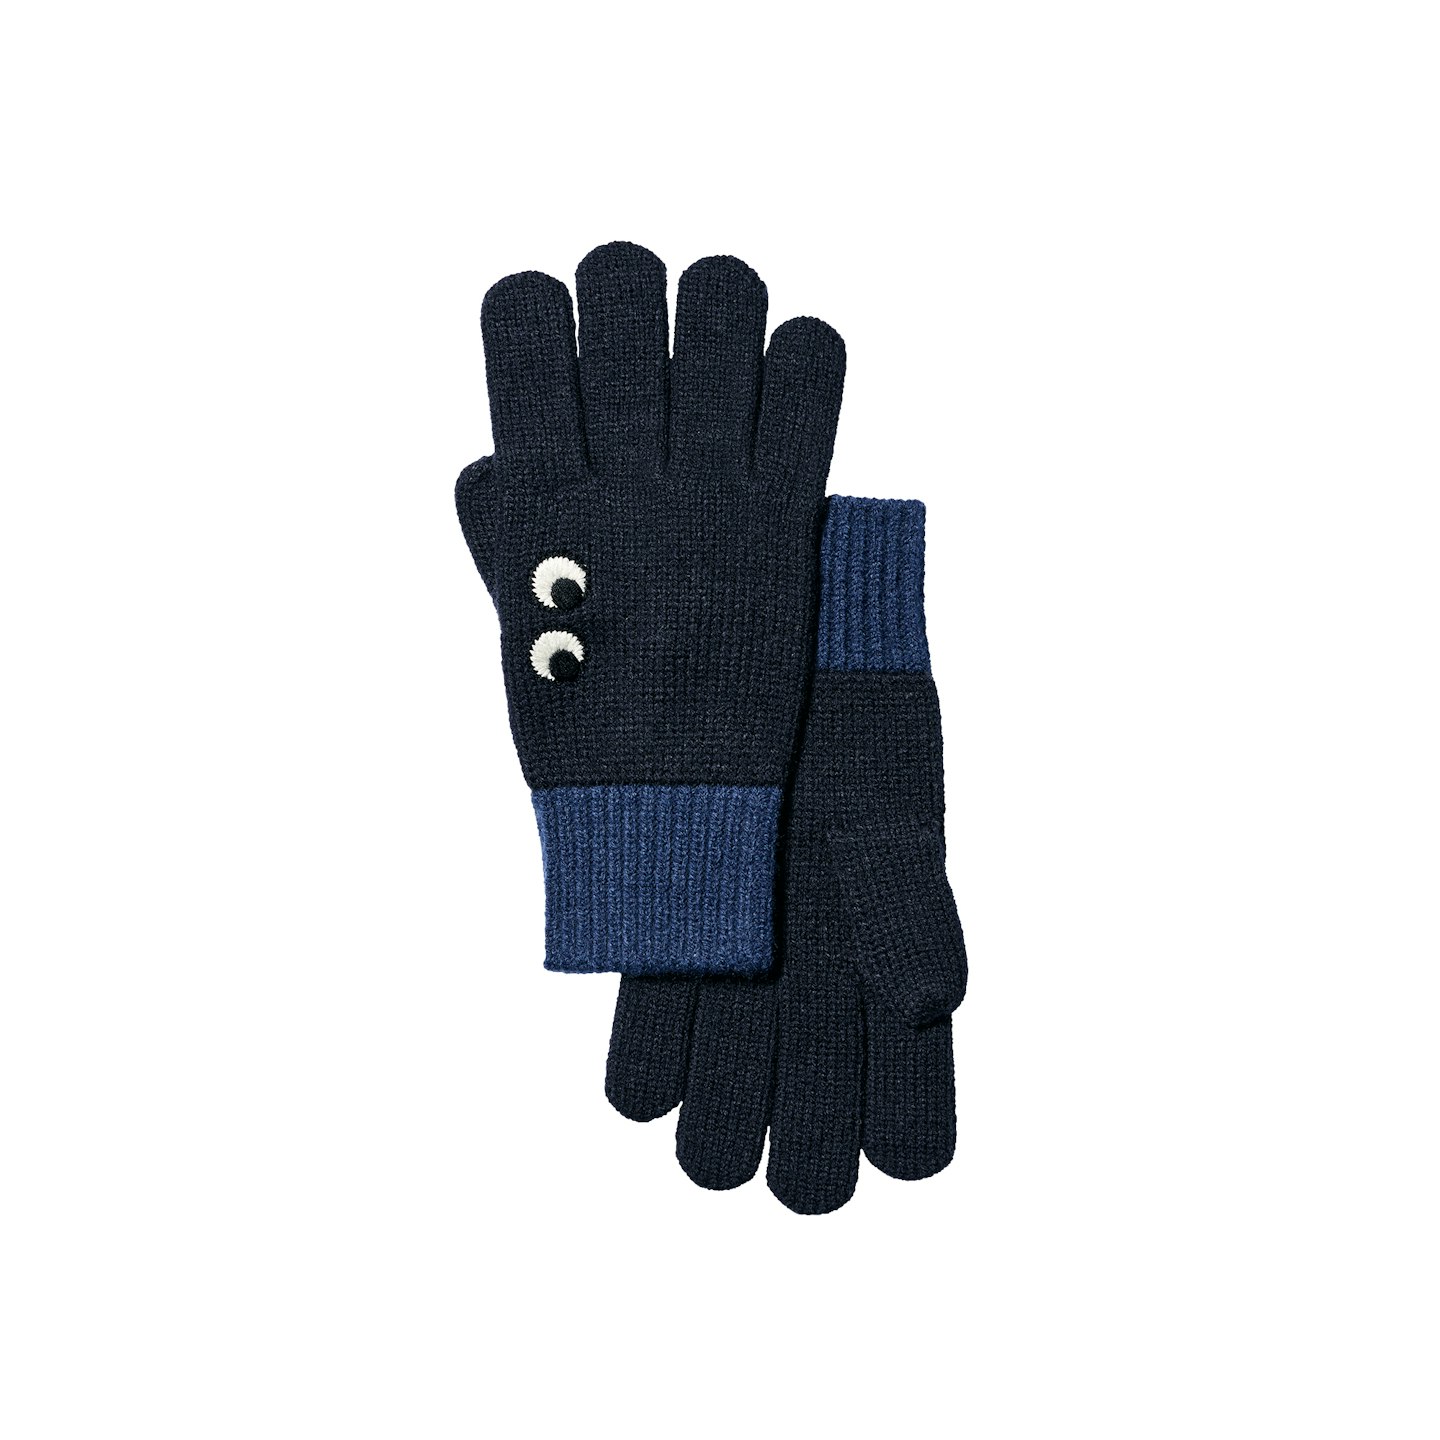 Uniqlo x Anya Hindmarch, Heattech Knitted Gloves